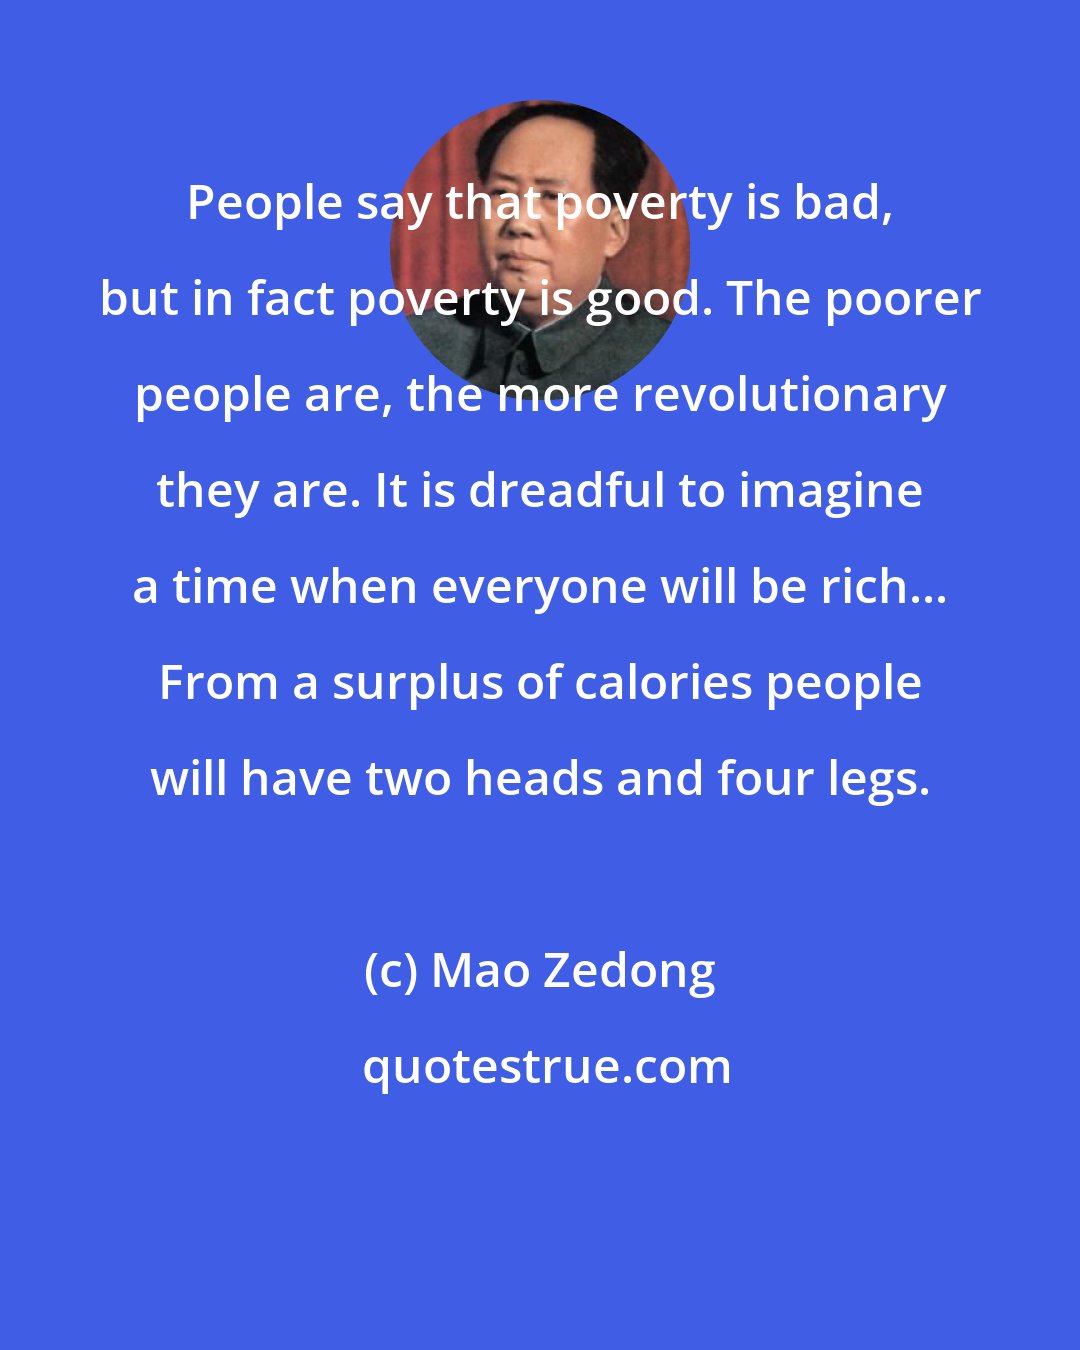 Mao Zedong: People say that poverty is bad, but in fact poverty is good. The poorer people are, the more revolutionary they are. It is dreadful to imagine a time when everyone will be rich... From a surplus of calories people will have two heads and four legs.